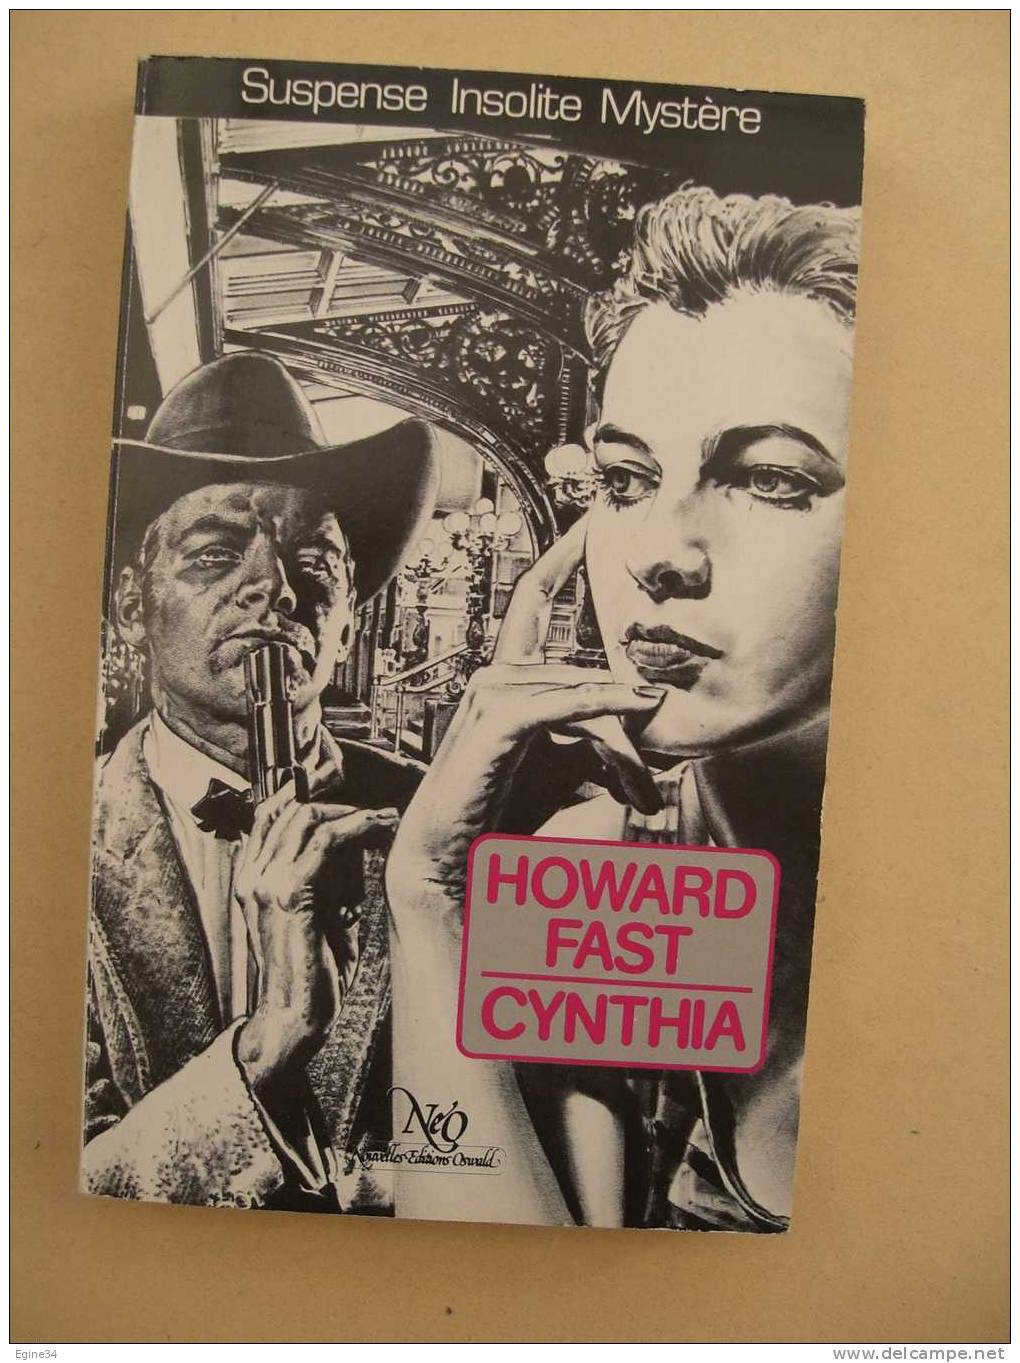 SUSPENSE INSOLITE MYSTERE  - HOWARD FAST  -  CYNTHIA - NEO Nouvelles Ed. Oswald